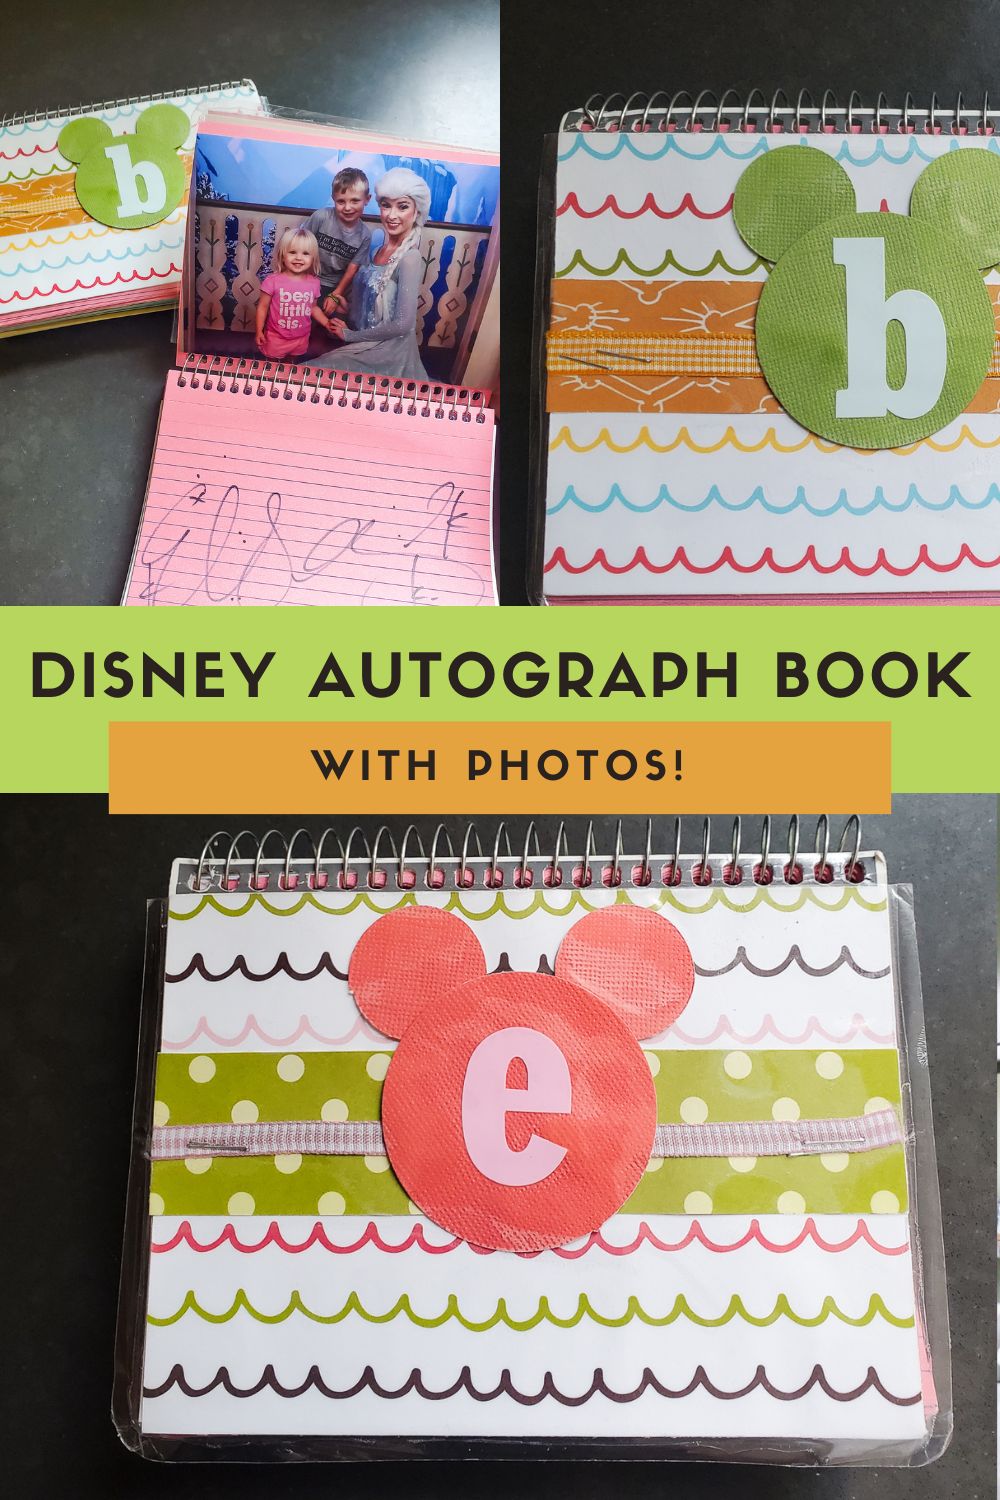 How to Make Your Own Disney Autograph Book